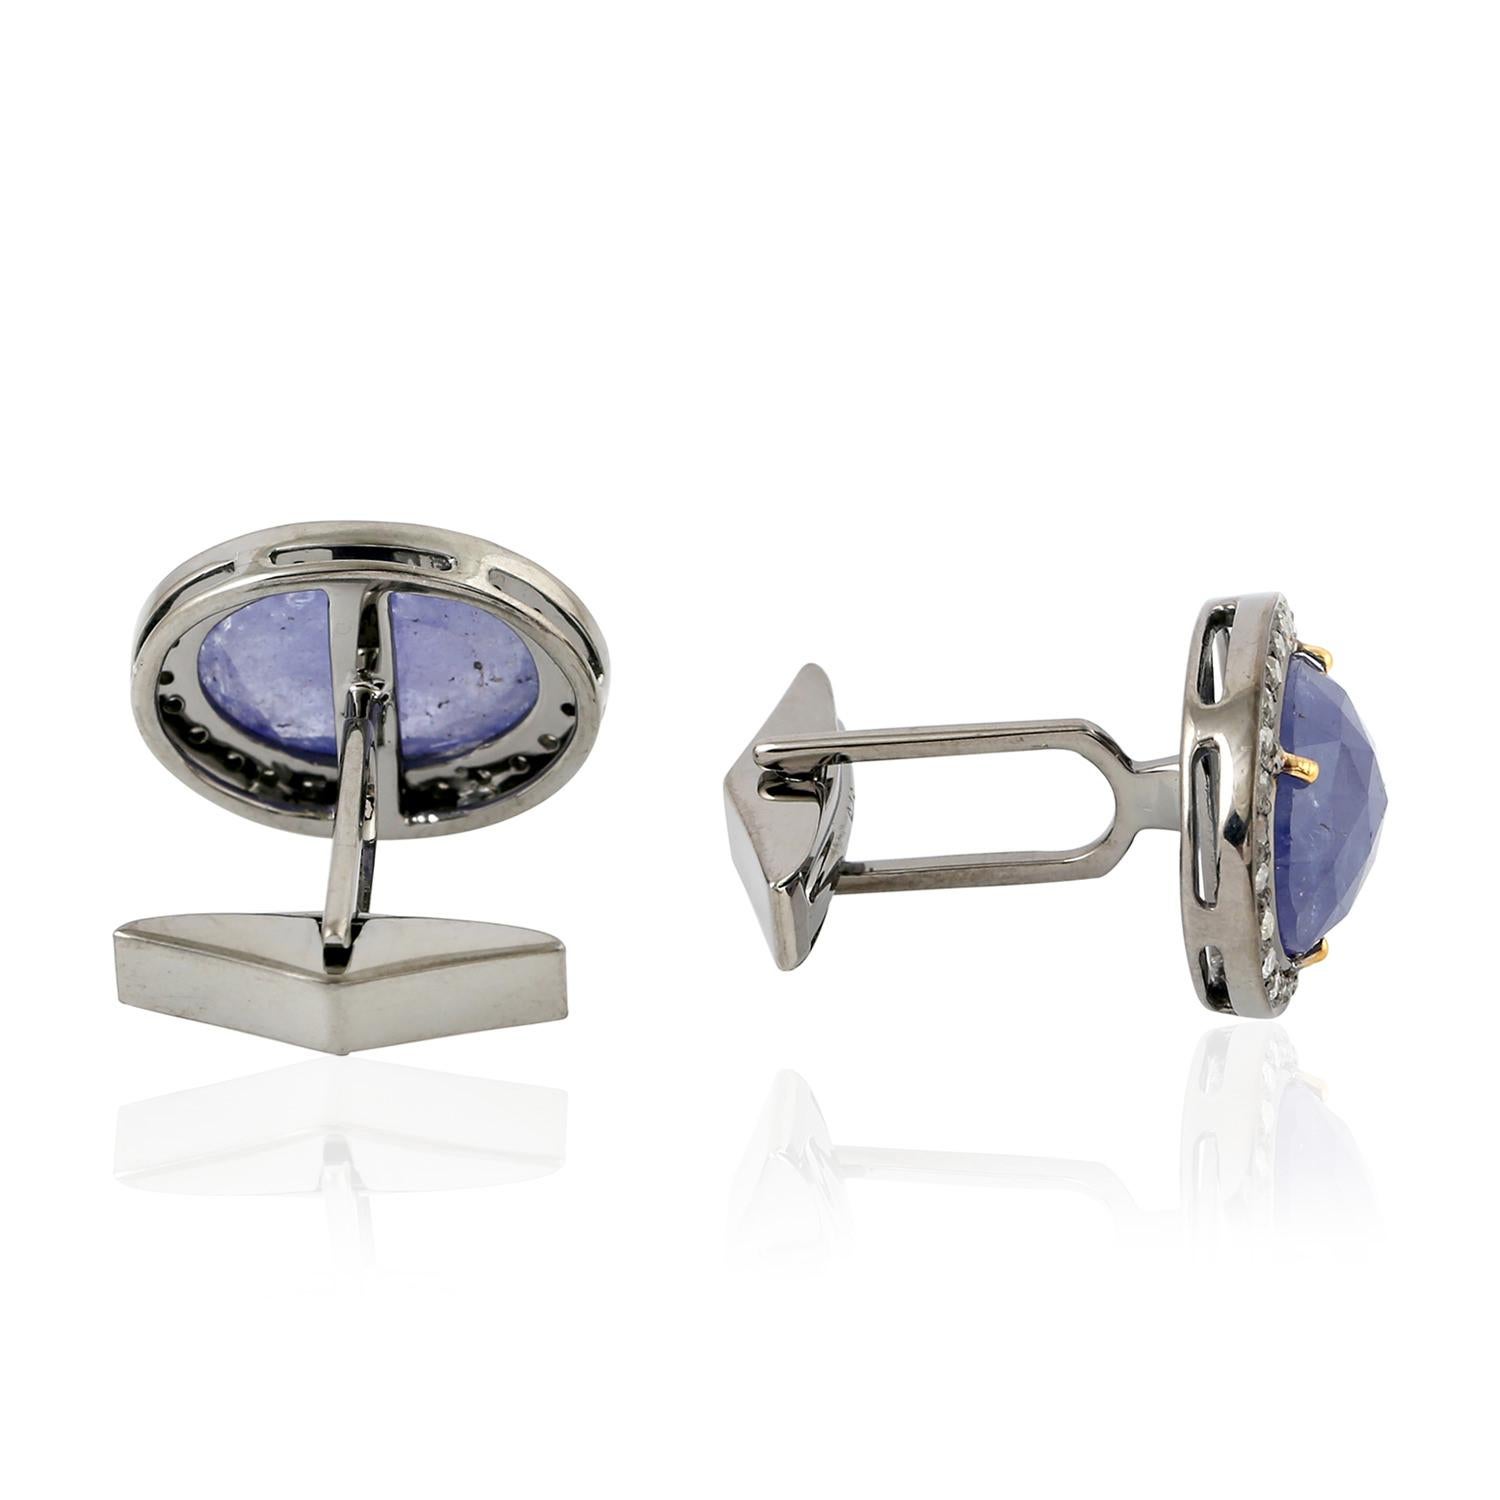 Cast from 18-karat gold and sterling silver, these cuff links are hand set with 10.43 carats tanzanite and .58 carats of diamonds in blackened finish.

FOLLOW  MEGHNA JEWELS storefront to view the latest collection & exclusive pieces.  Meghna Jewels